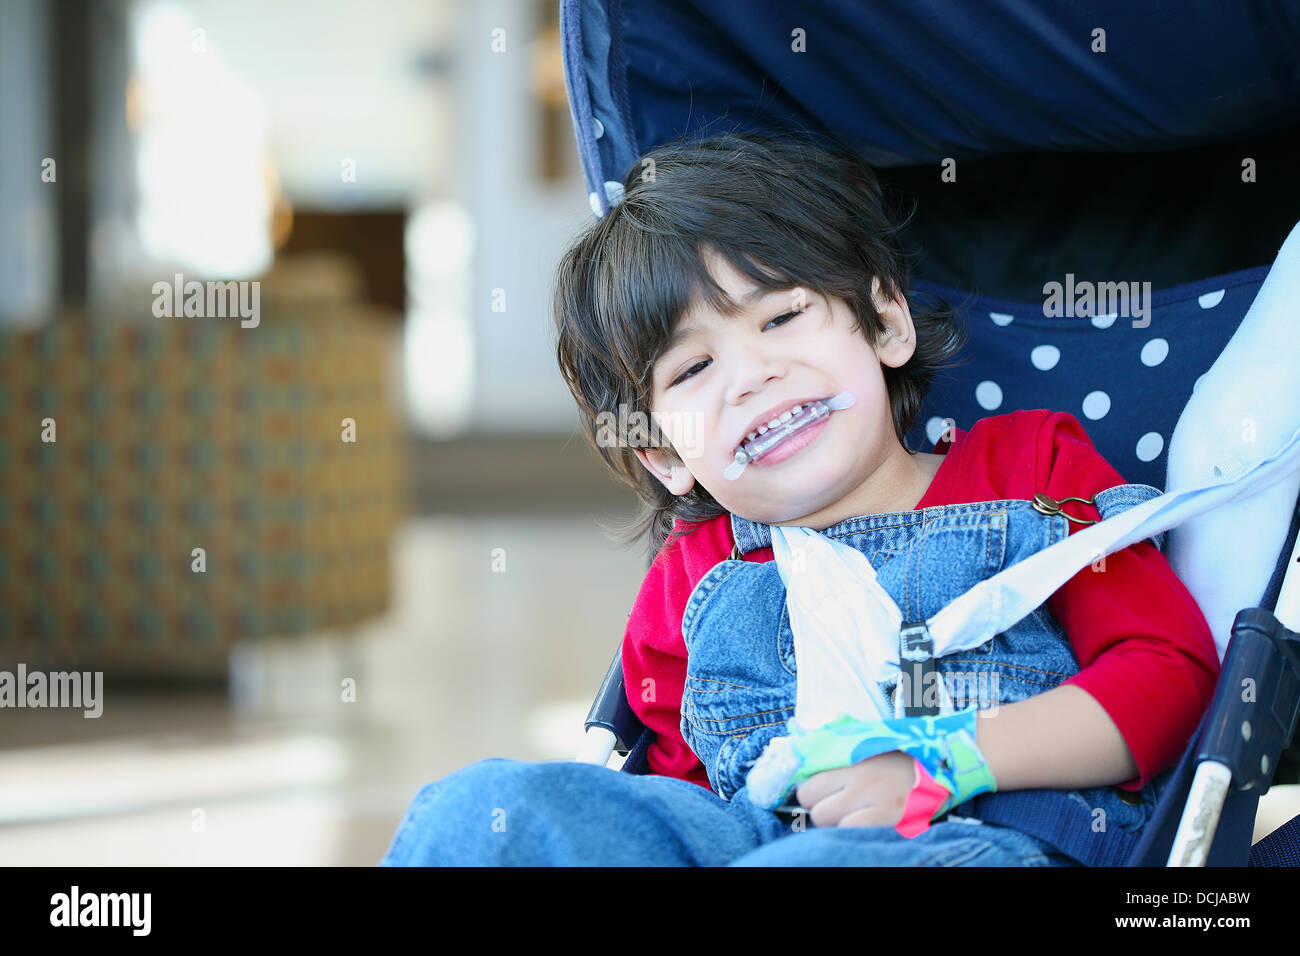 Cute disabled boy with cerebral palsy smiling in stroller Stock Photo